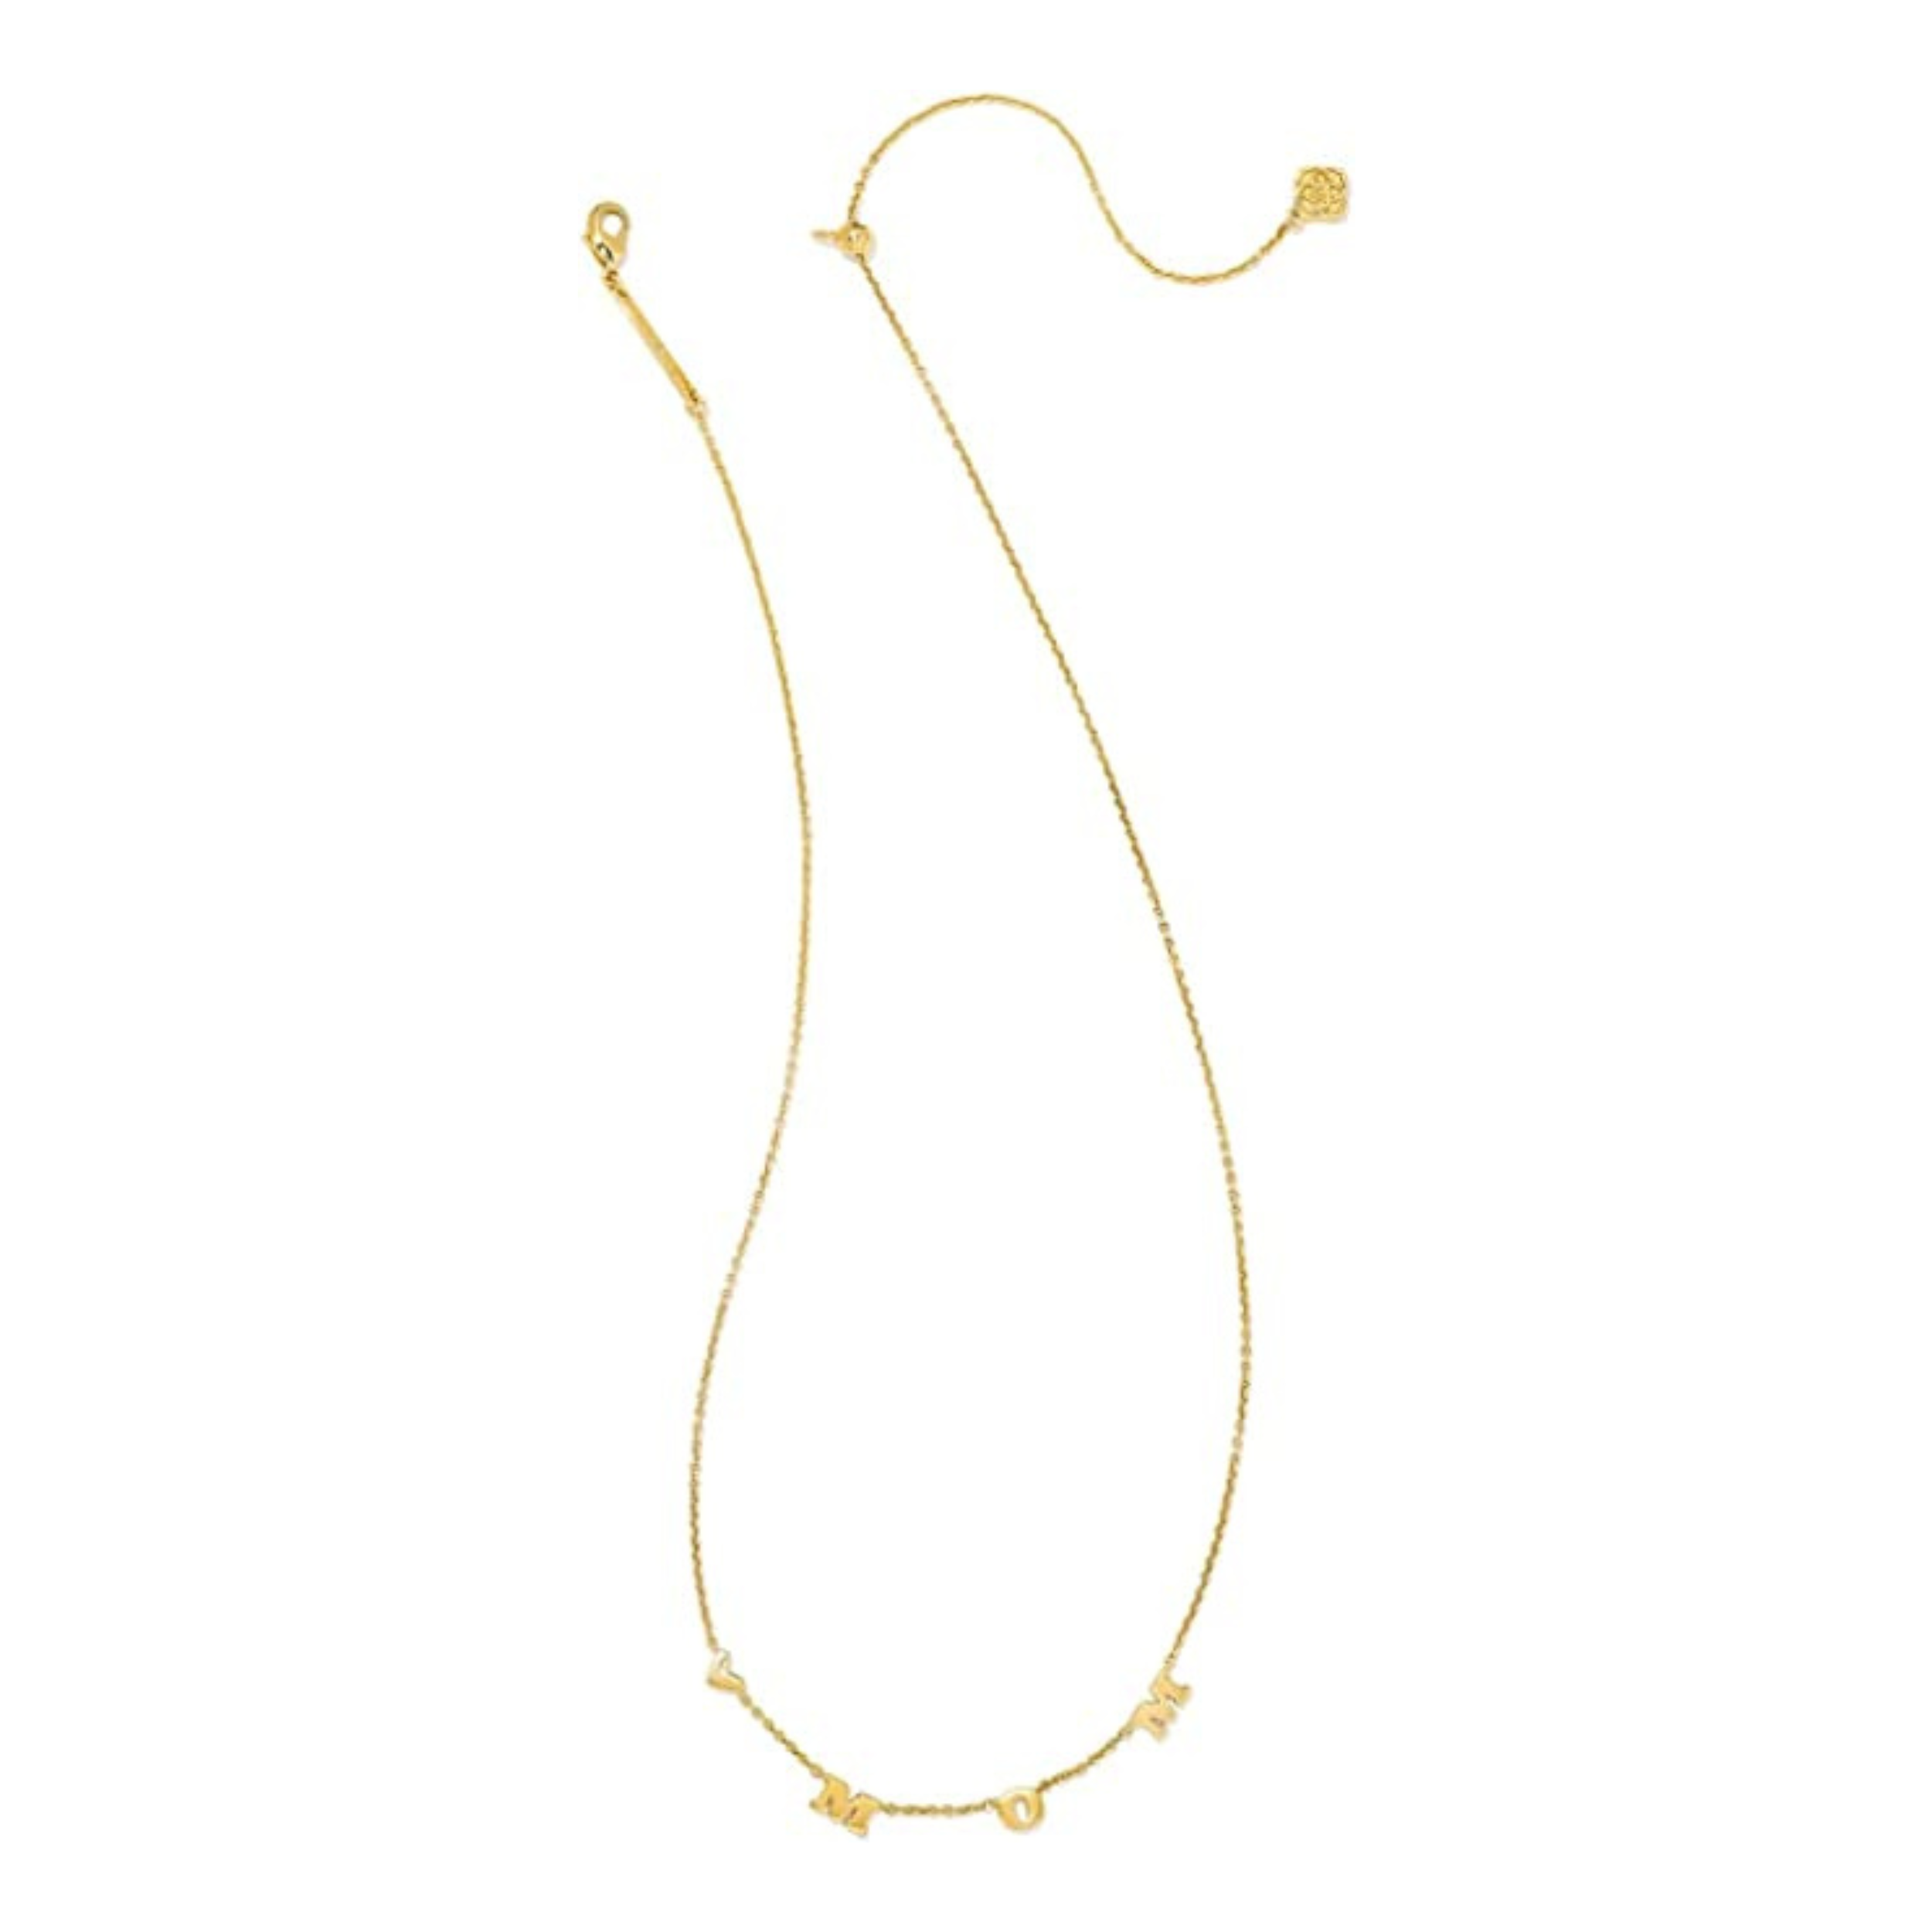 Kendra Scott | Kendra Scott Mom Pendant Strand Necklace in Gold - Giddy Up Glamour Boutique